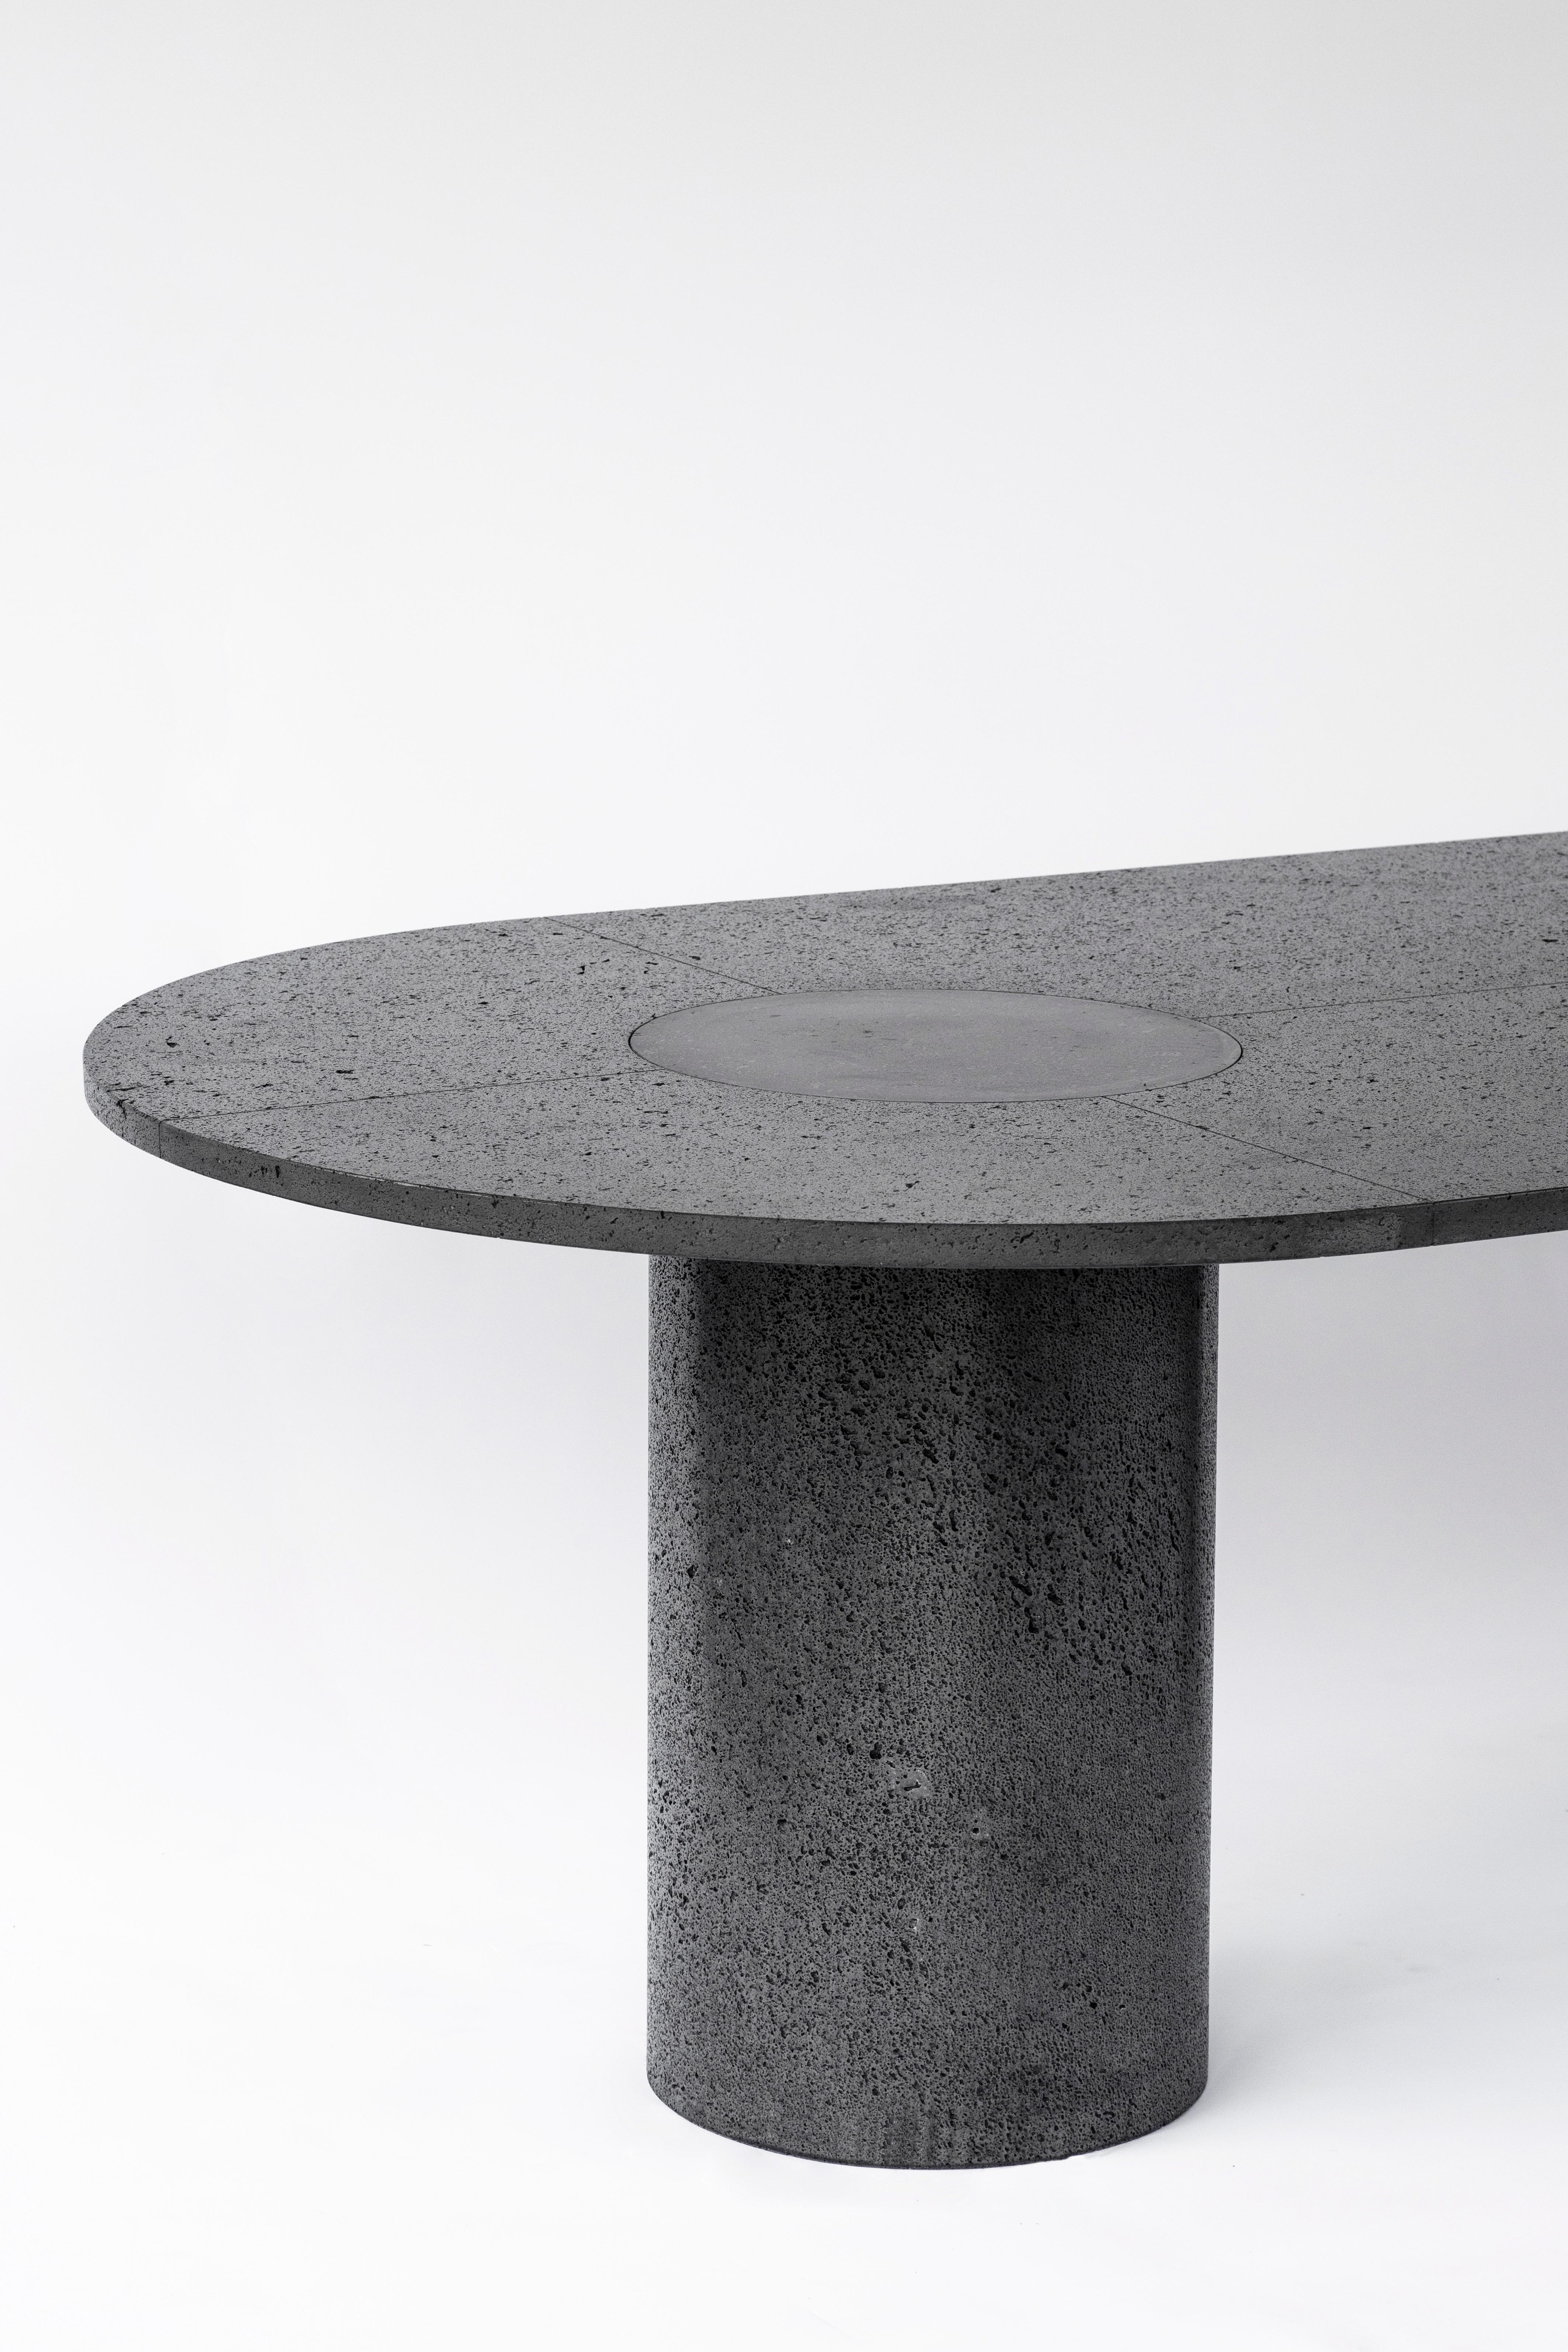 Minimalist Petra Table by Peca For Sale